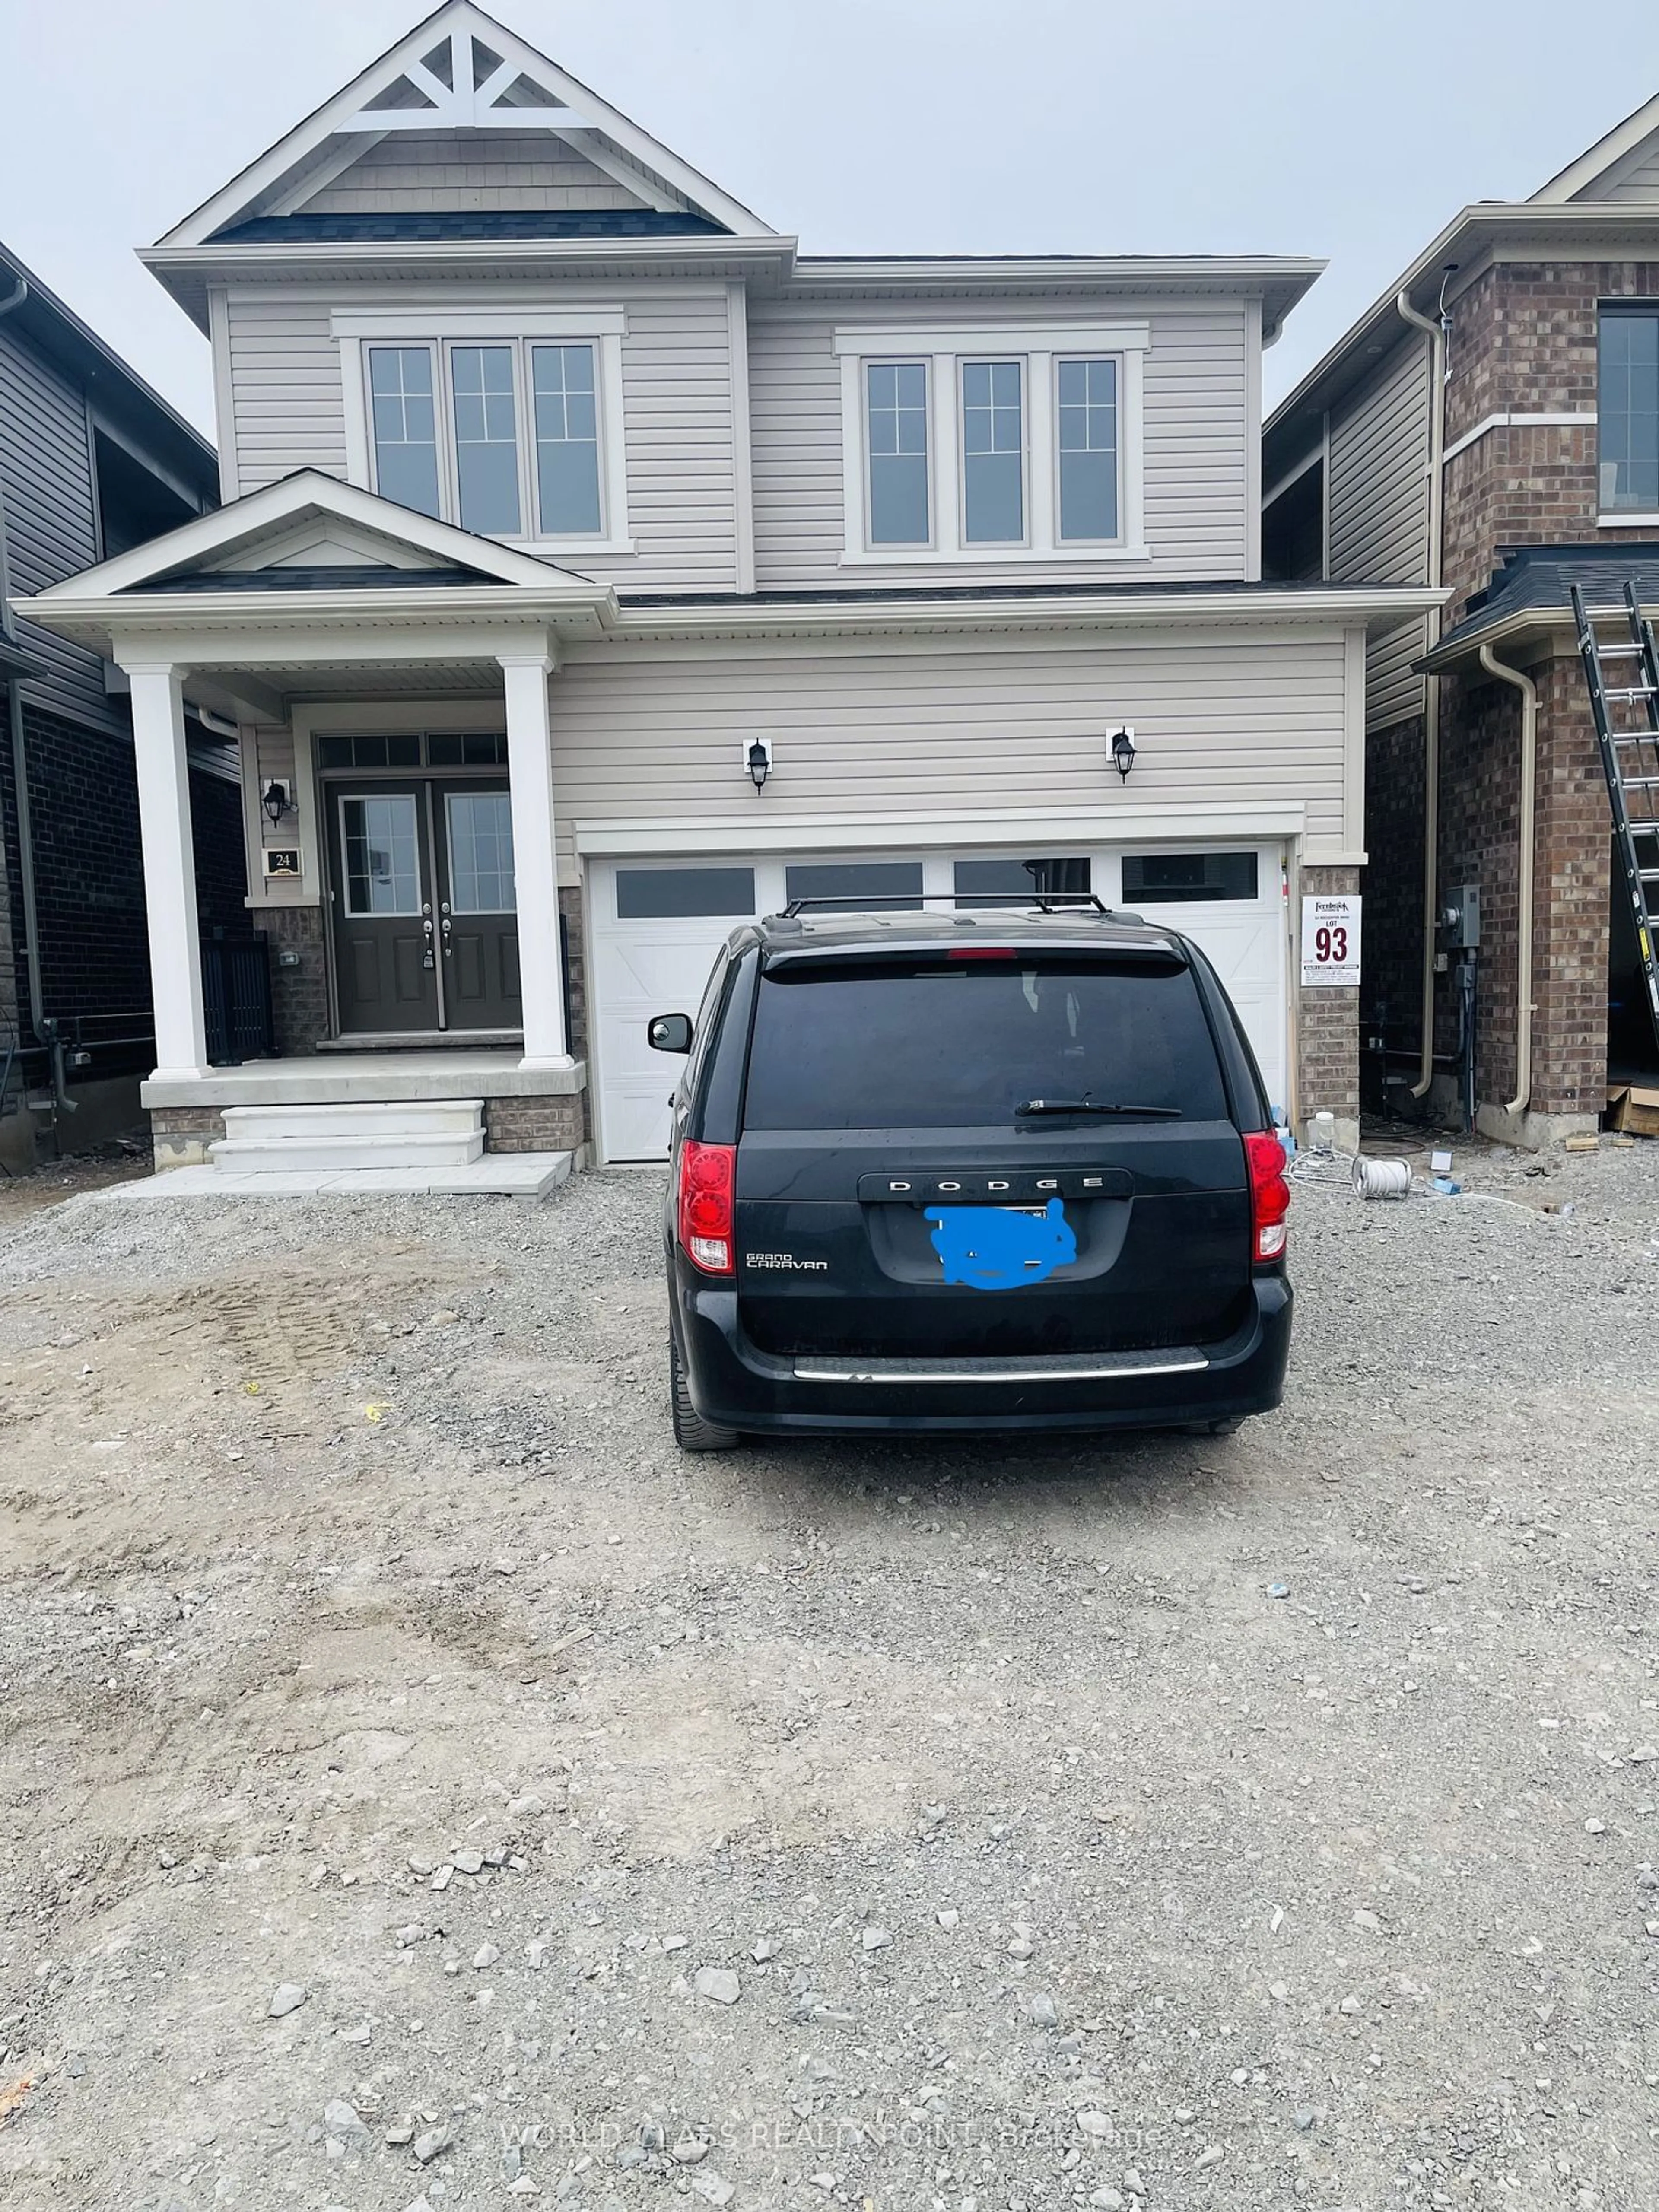 Frontside or backside of a home for 24 Rochester Dr, Barrie Ontario L9J 0W1